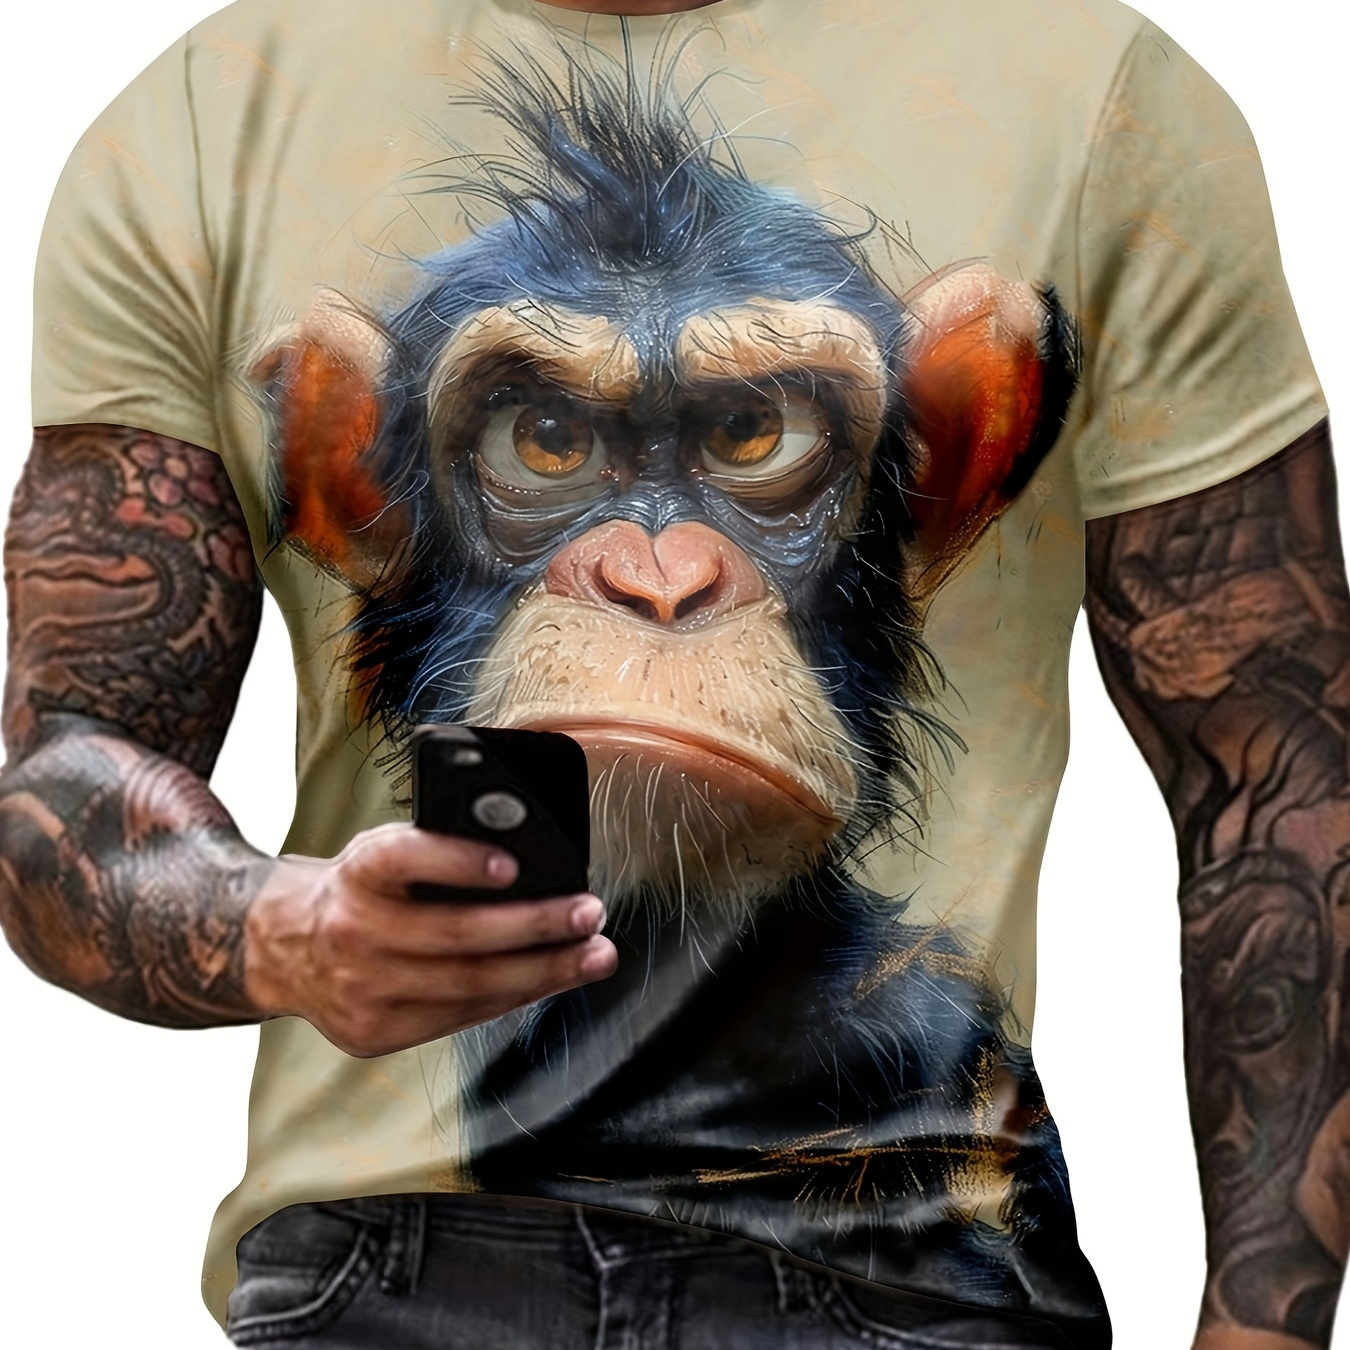 

3d Printed Monkey Graphic Crew Neck Short Sleeve T-shirt For Men, Casual Summer T-shirt For Daily Wear And Vacation Resorts